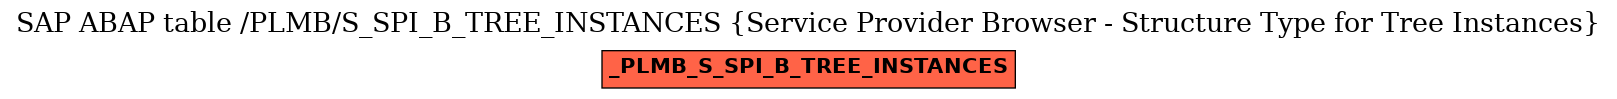 E-R Diagram for table /PLMB/S_SPI_B_TREE_INSTANCES (Service Provider Browser - Structure Type for Tree Instances)